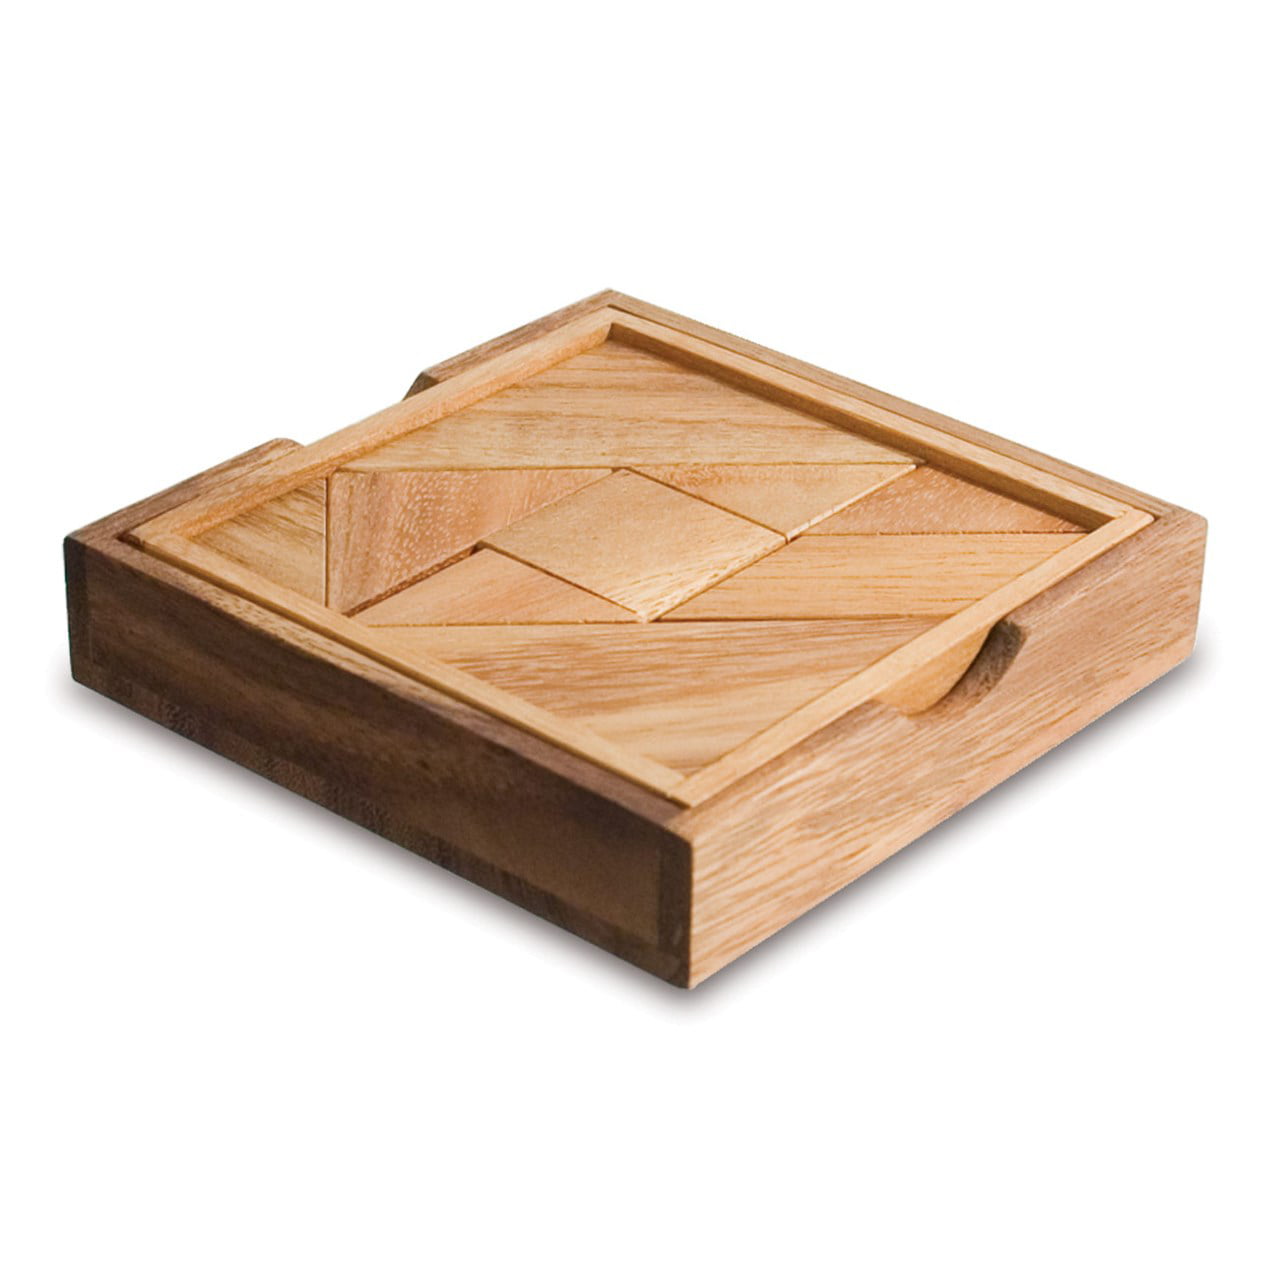 WOODEN PUZZLES IN A BOX